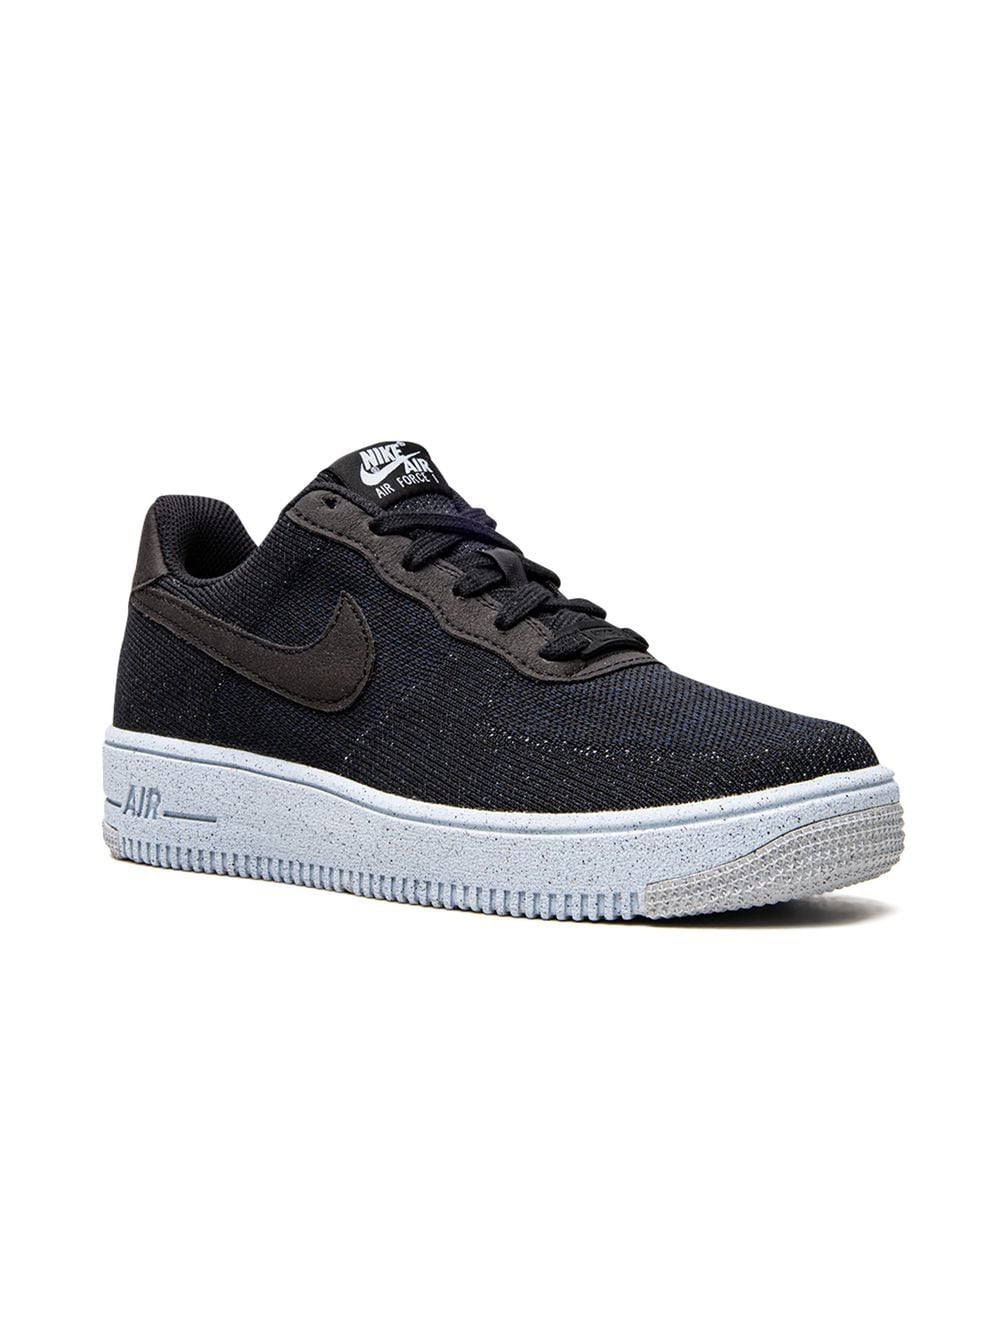 Image 1 of Nike Kids Air Force 1 Crater Flyknit sneakers